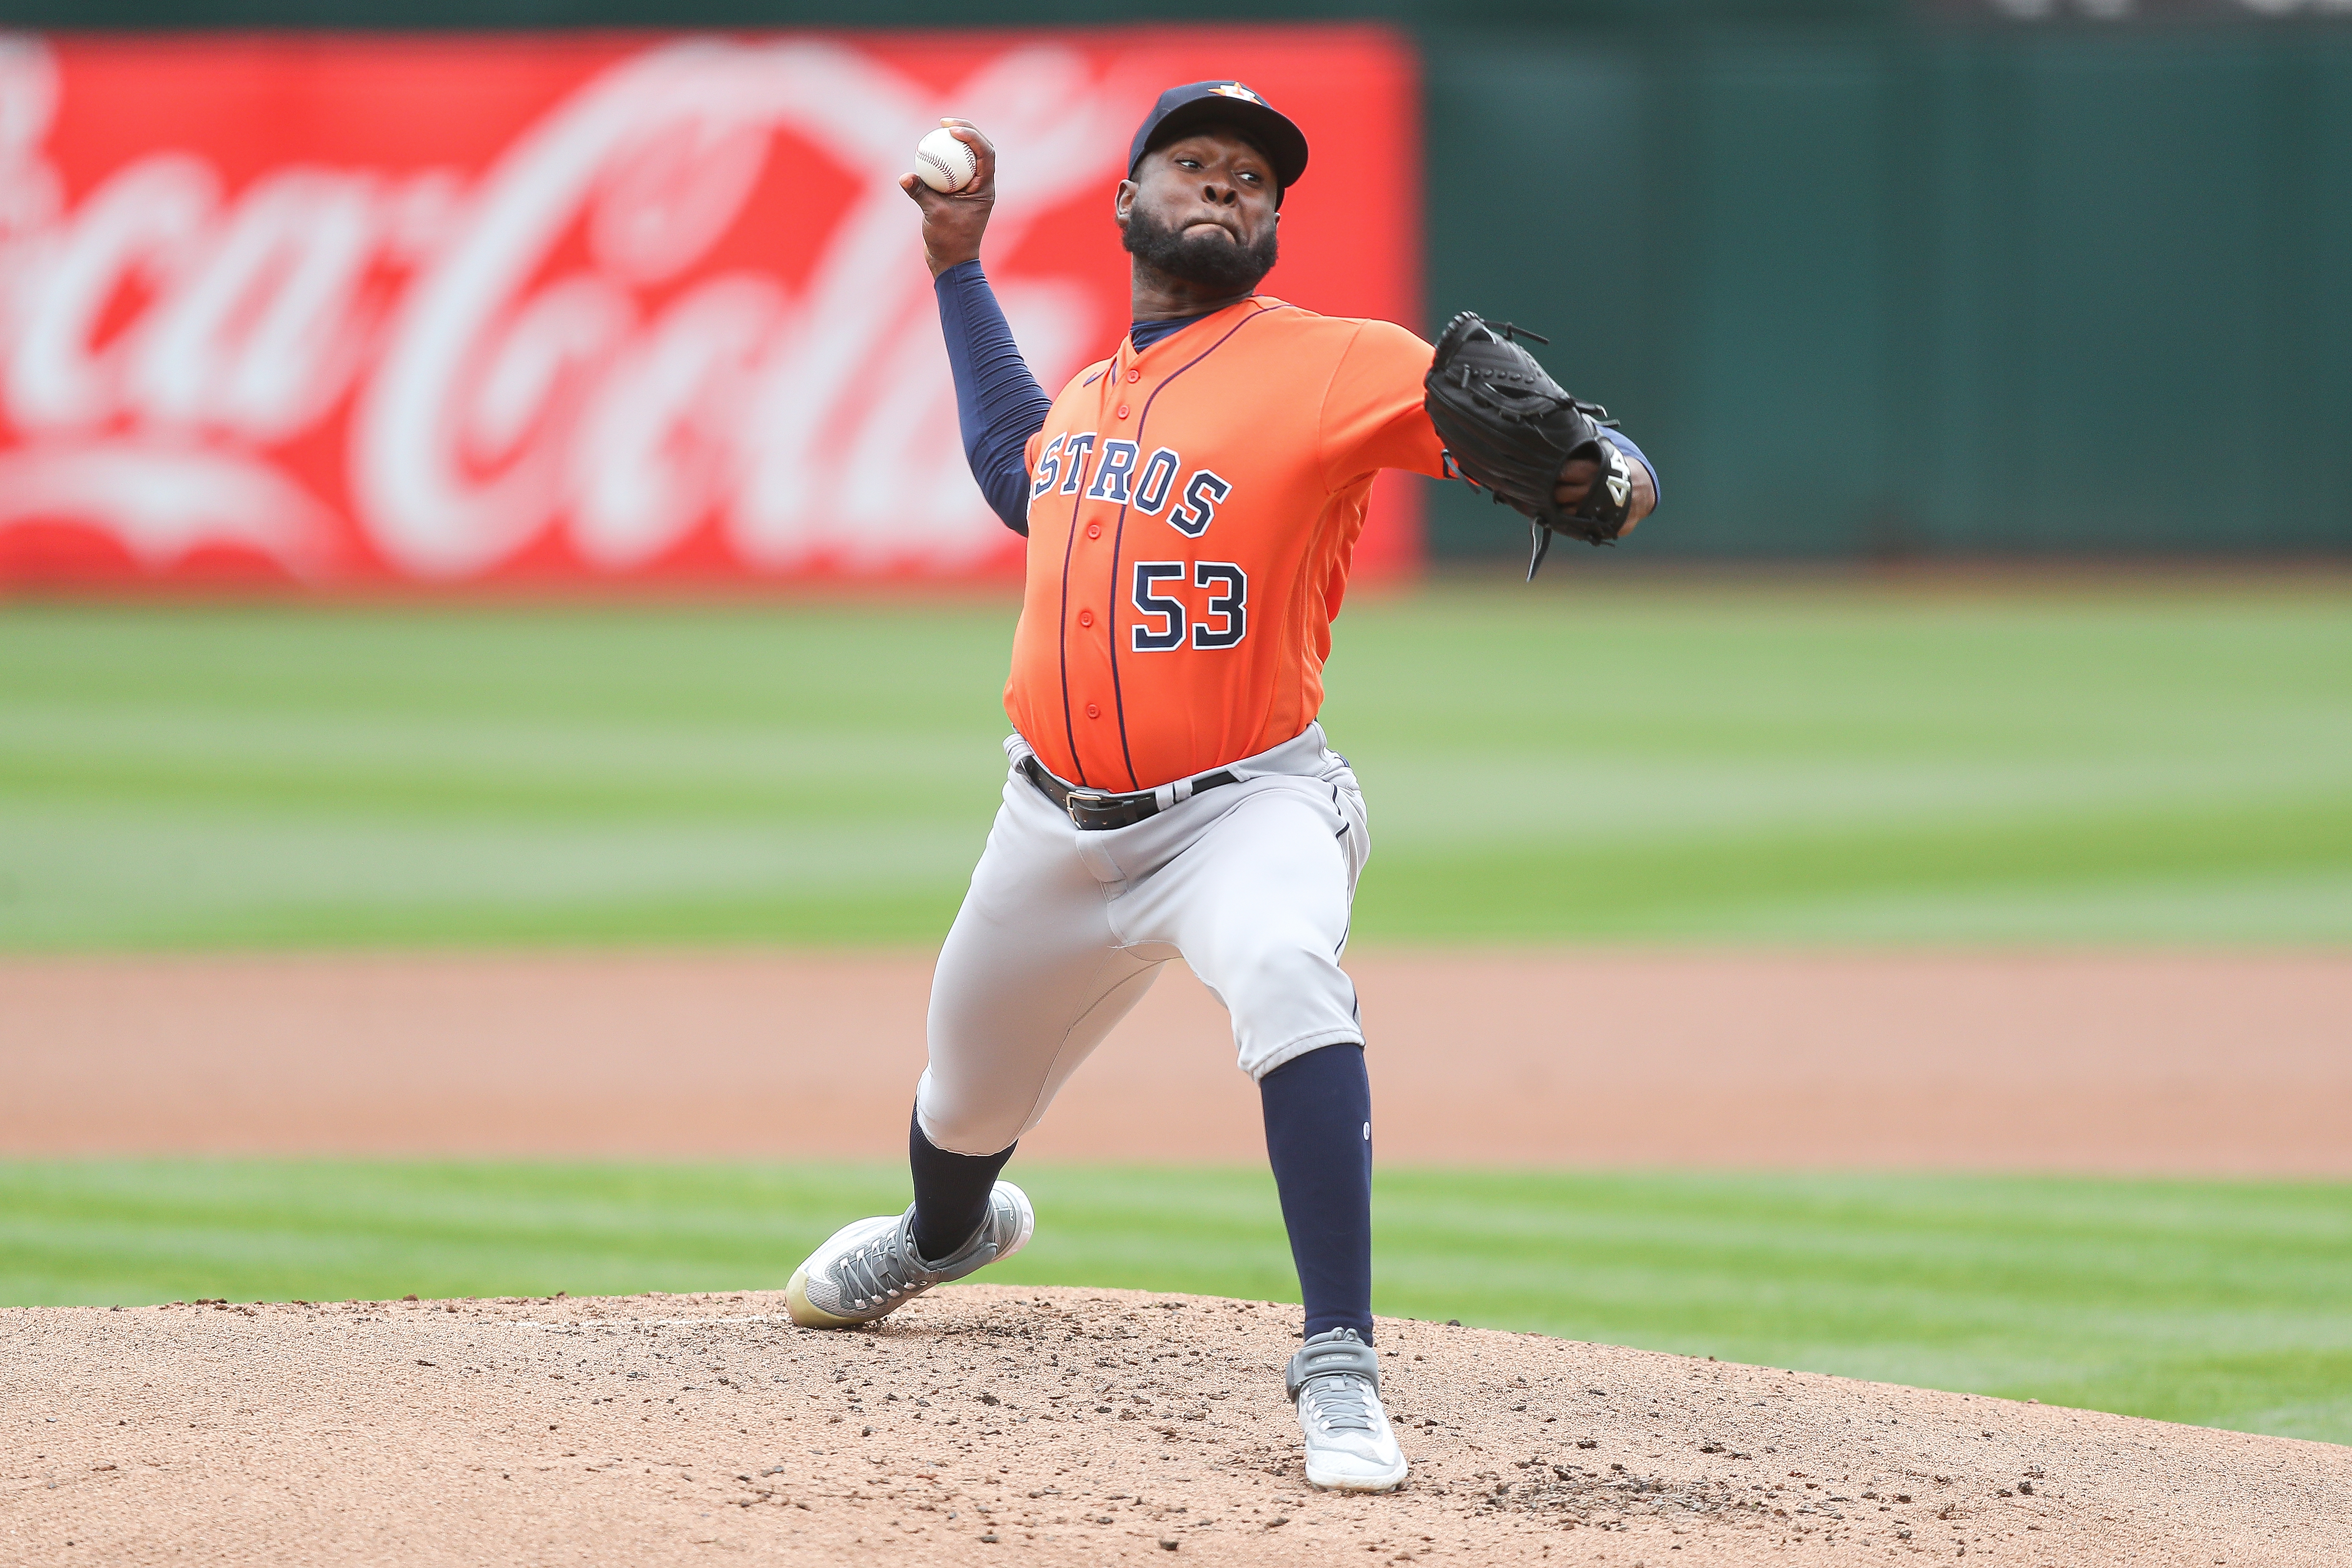 Cristian Javier #53 of the Houston Astros pitches in the first inning against the Oakland Athletics at RingCentral Coliseum on May 28, 2023 in Oakland, California.